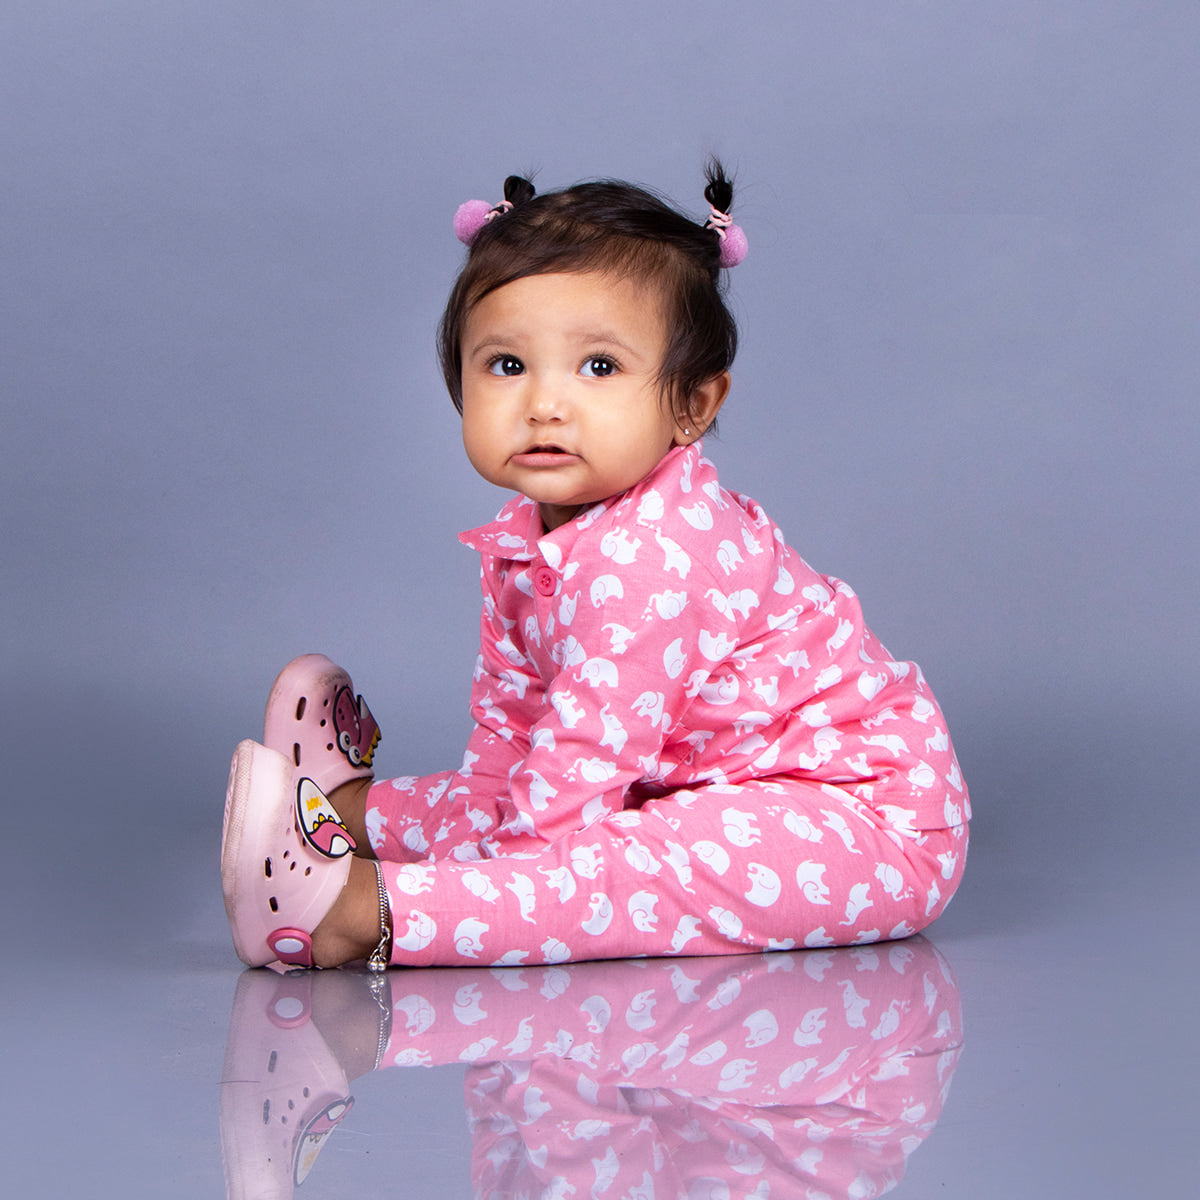 Full Sleeves Baby Elephant Printed Pajamas / Night Suit  for Baby/Kids - Pink